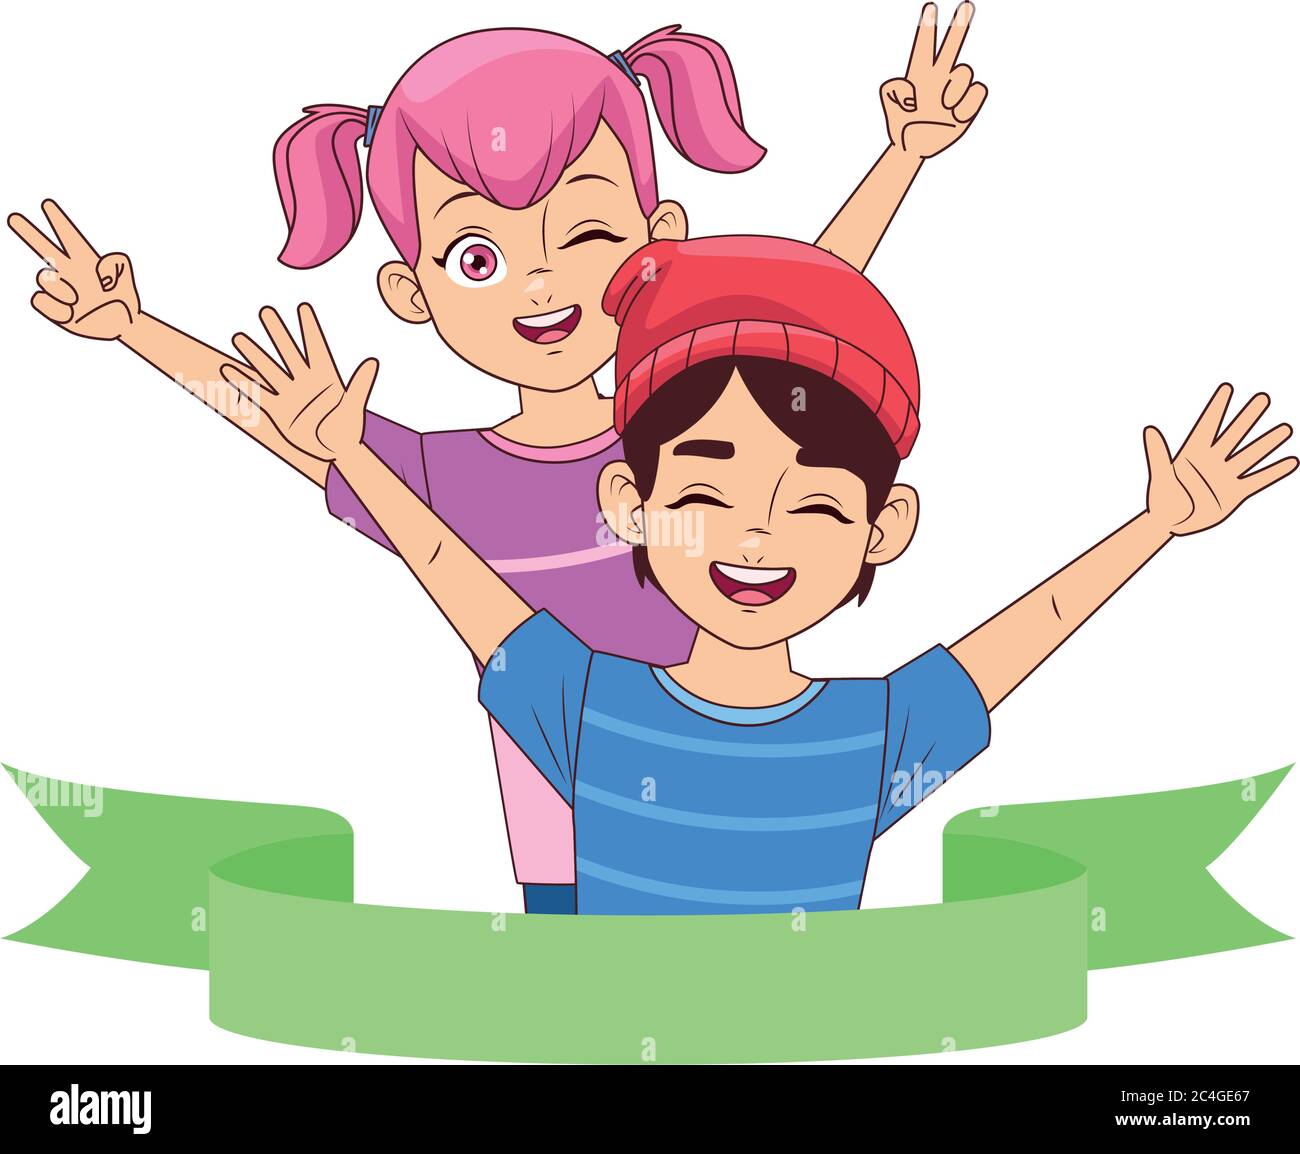 happy young kids avatars characters vector illustration design Stock Vector